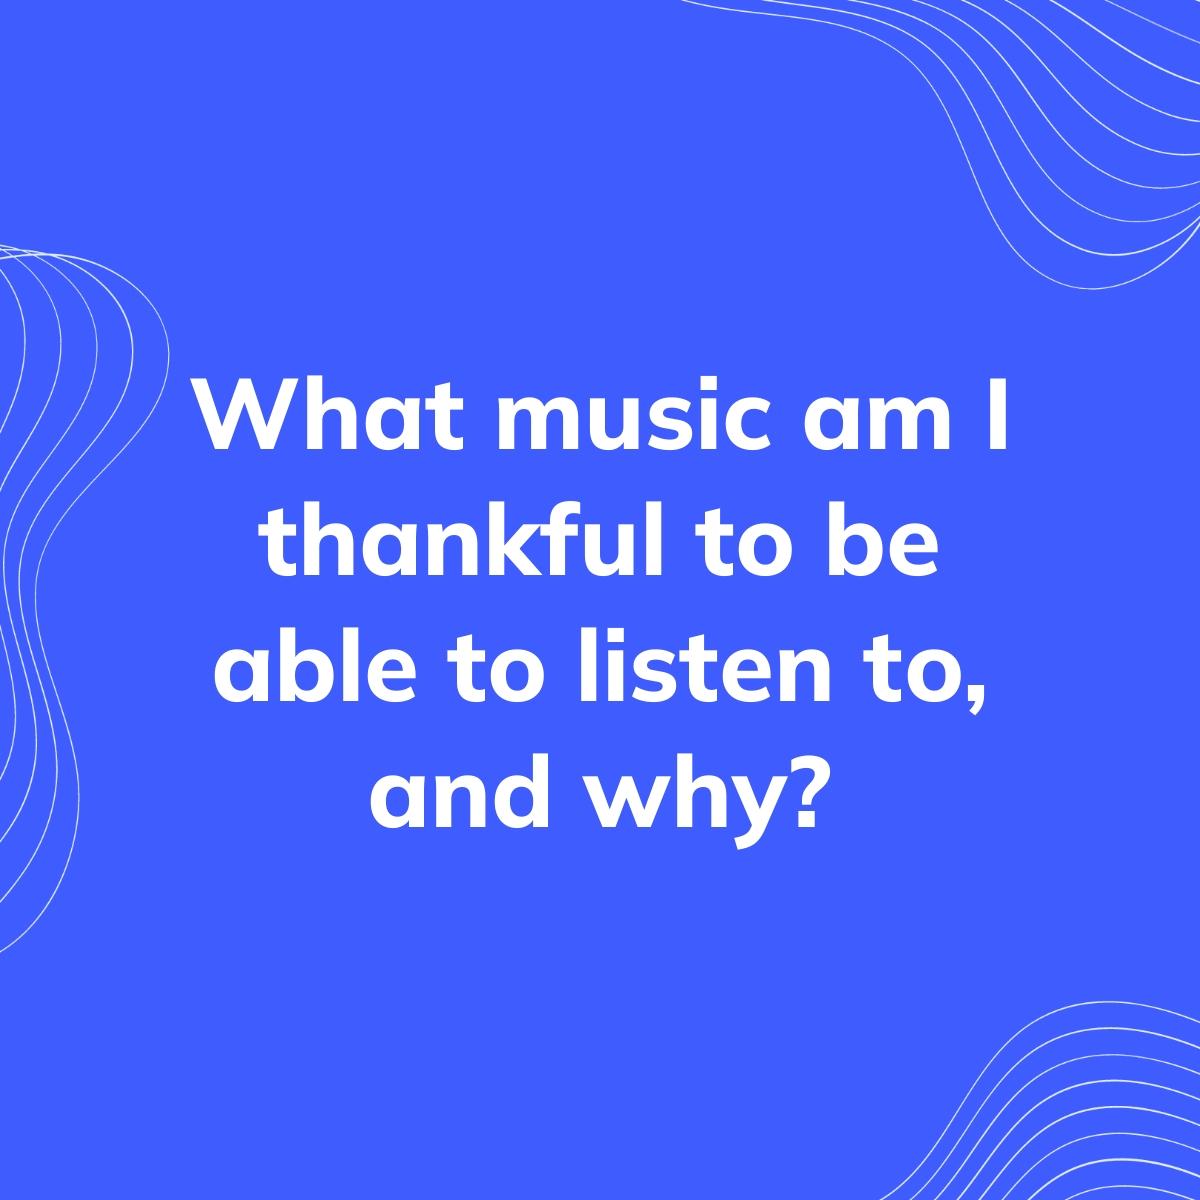 Journal Prompt: What music am I thankful to be able to listen to, and why?